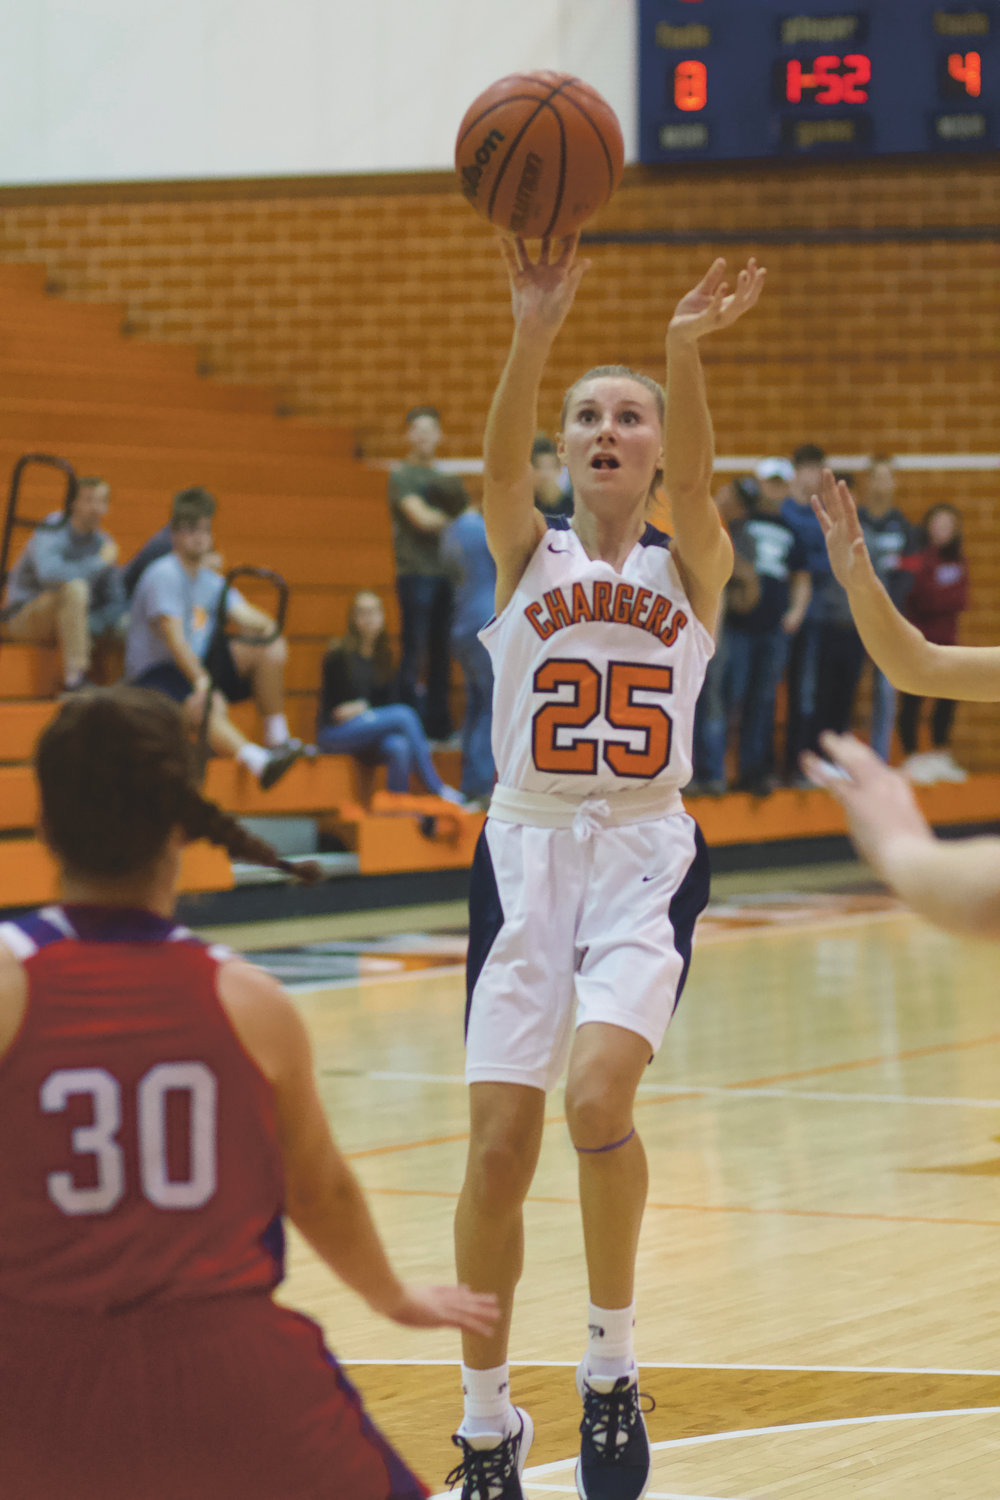 North Montgomery's Grace McClaskey fires up a shot in the Chargers' loss to Western Boone.